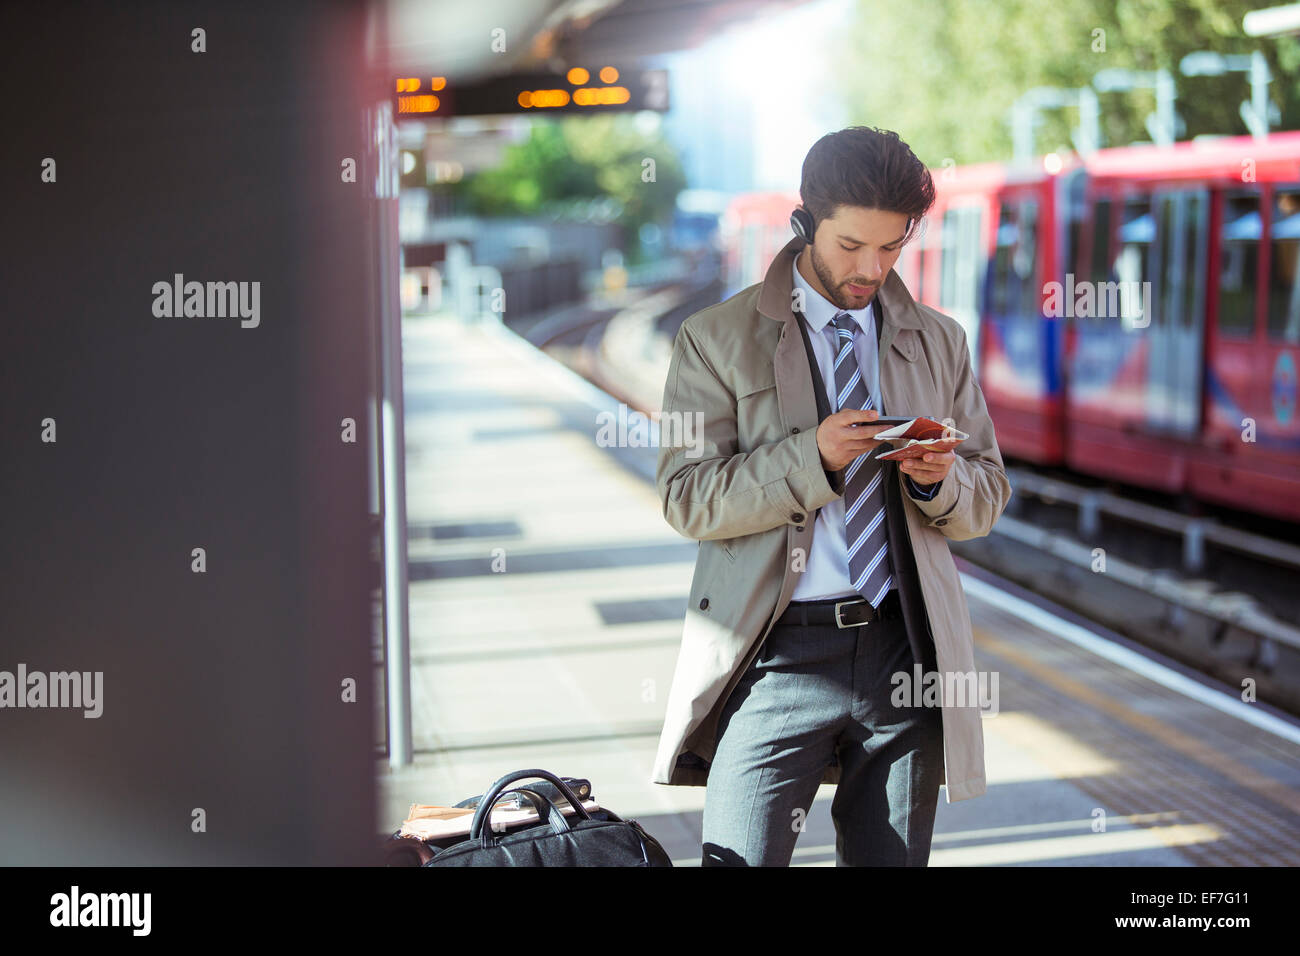 Businessman using cell phone in train station Stock Photo